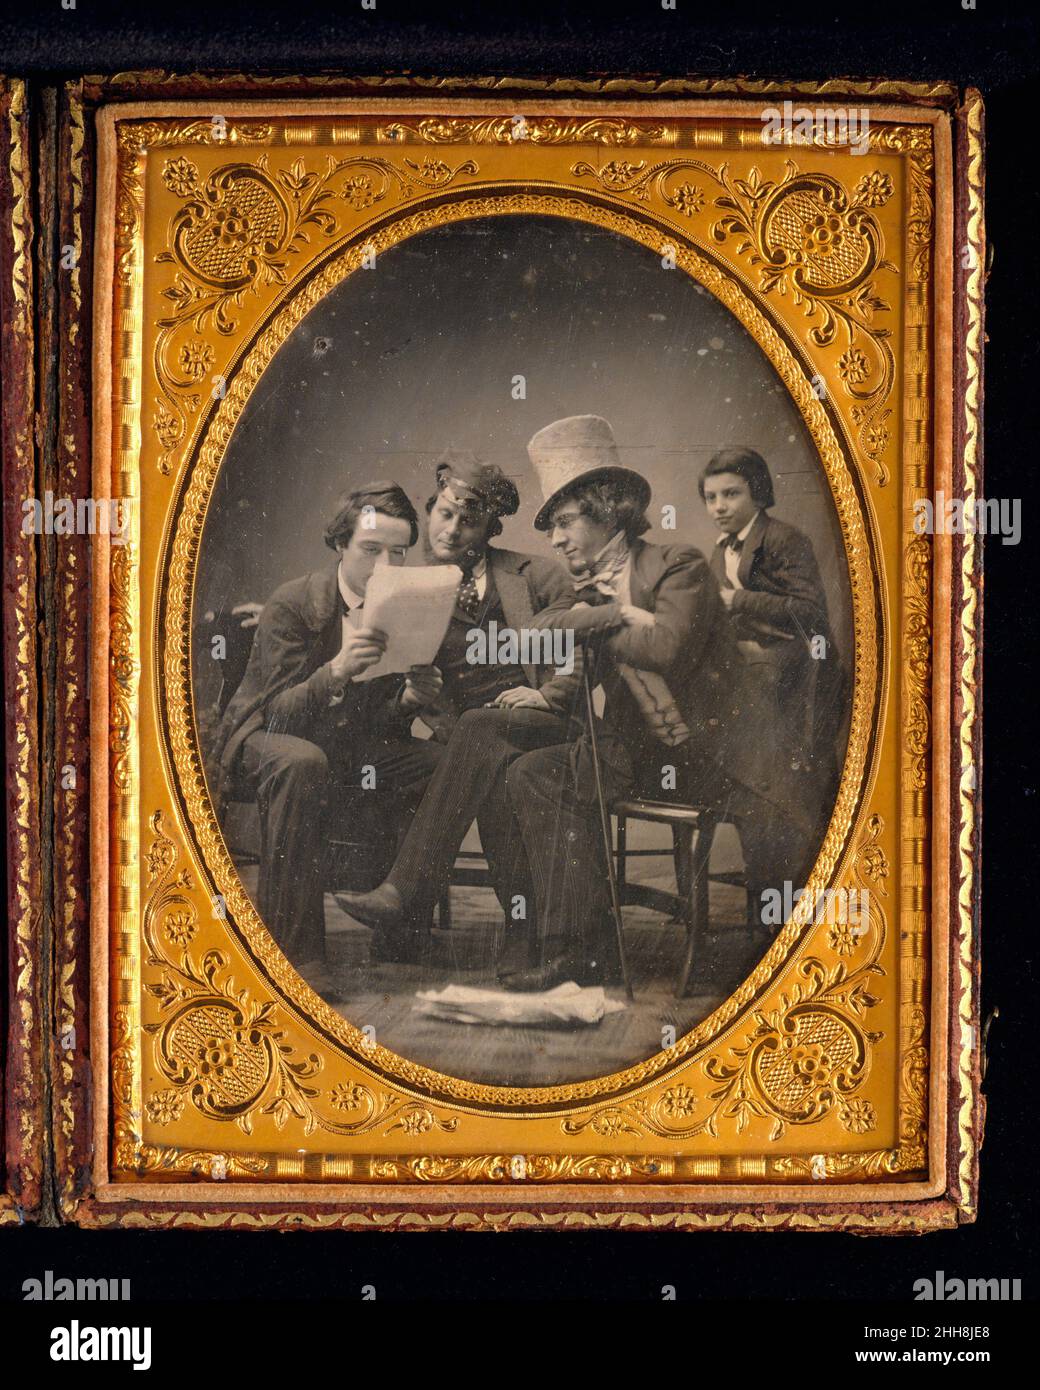 California News ca. 1850 Gabriel Harrison American Harrison drew on his background as a playwright, poet, and actor for his role in this daguerreotype, posing with his employer, Martin Lawrence, and his son. The group gathers eagerly to listen to the latest news of the California gold rush, which was followed with great excitement in New York throughout the 1840s and 1850s. Harrison took his inspiration for this genre scene from a painting of the same title by the American artist William Sidney Mount (1807–1868).. California News  286059 Stock Photo